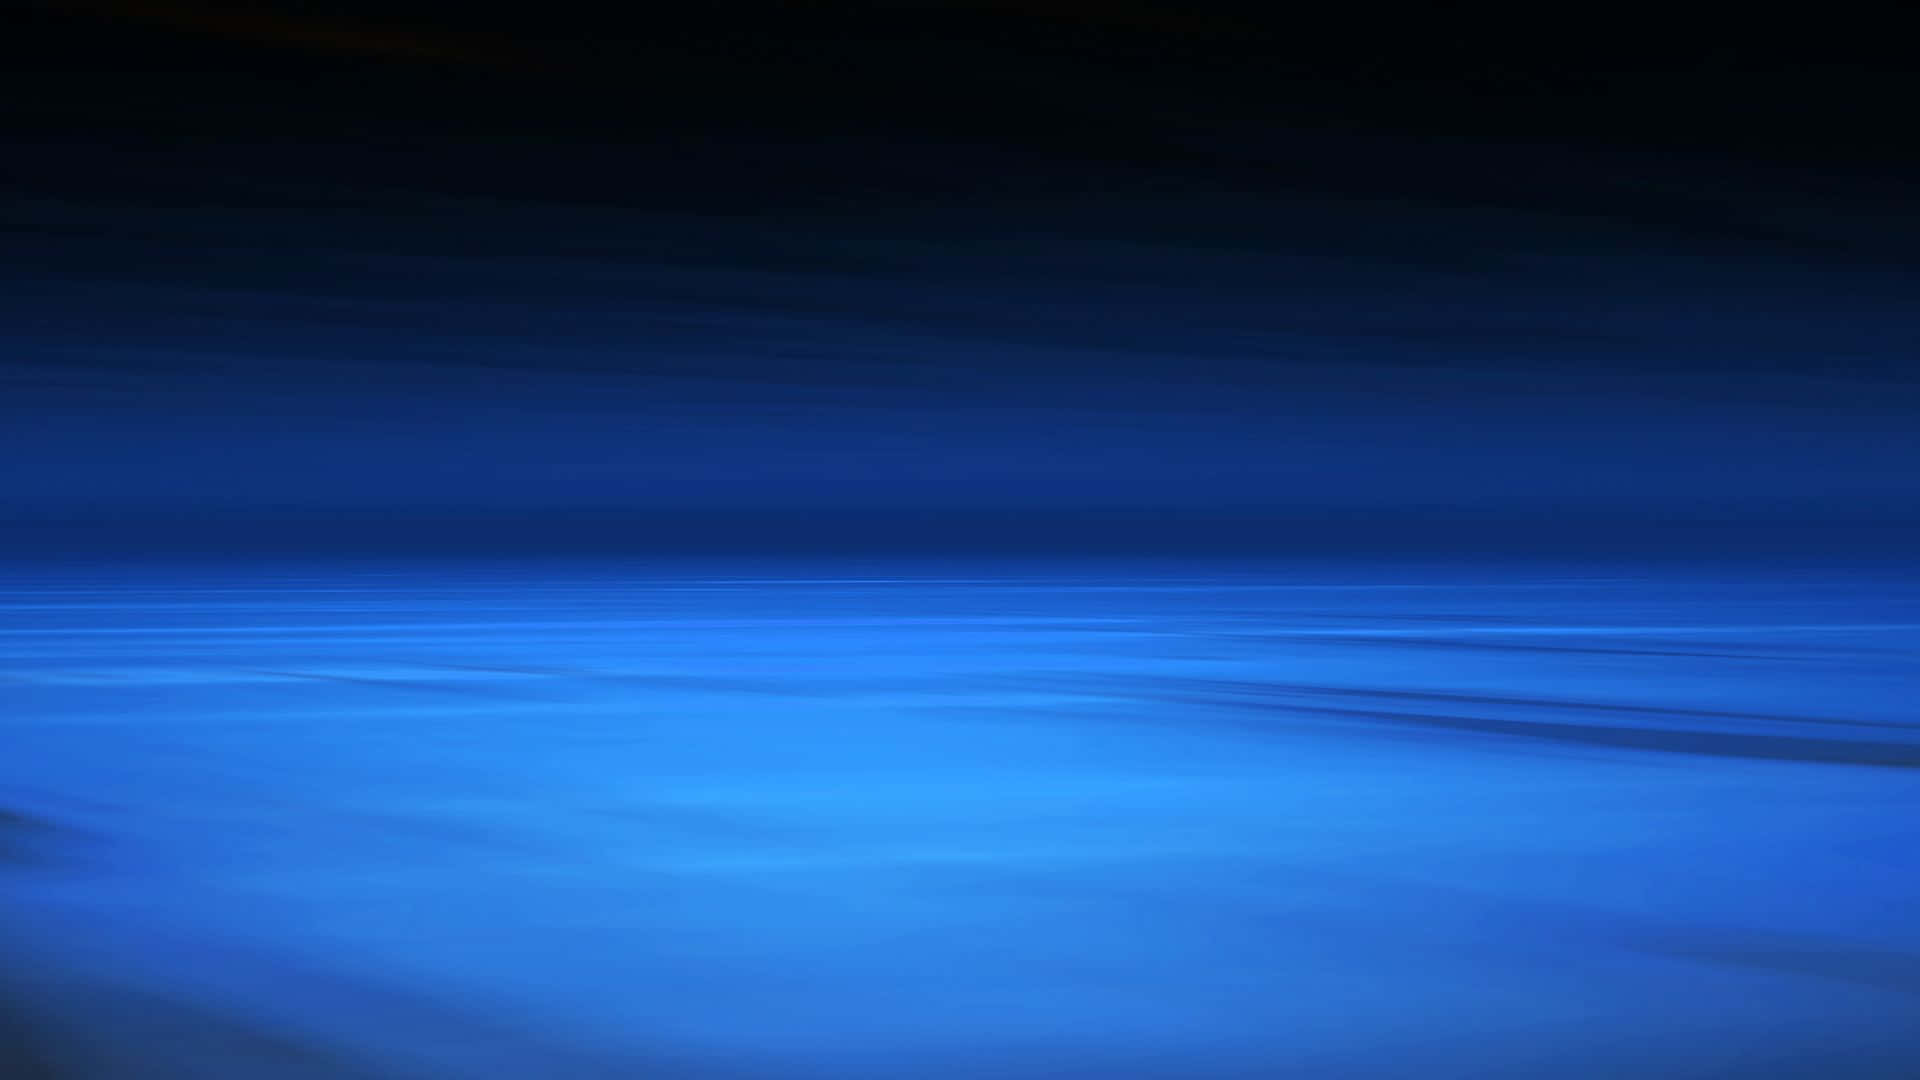 Explore the depths of Blue Space